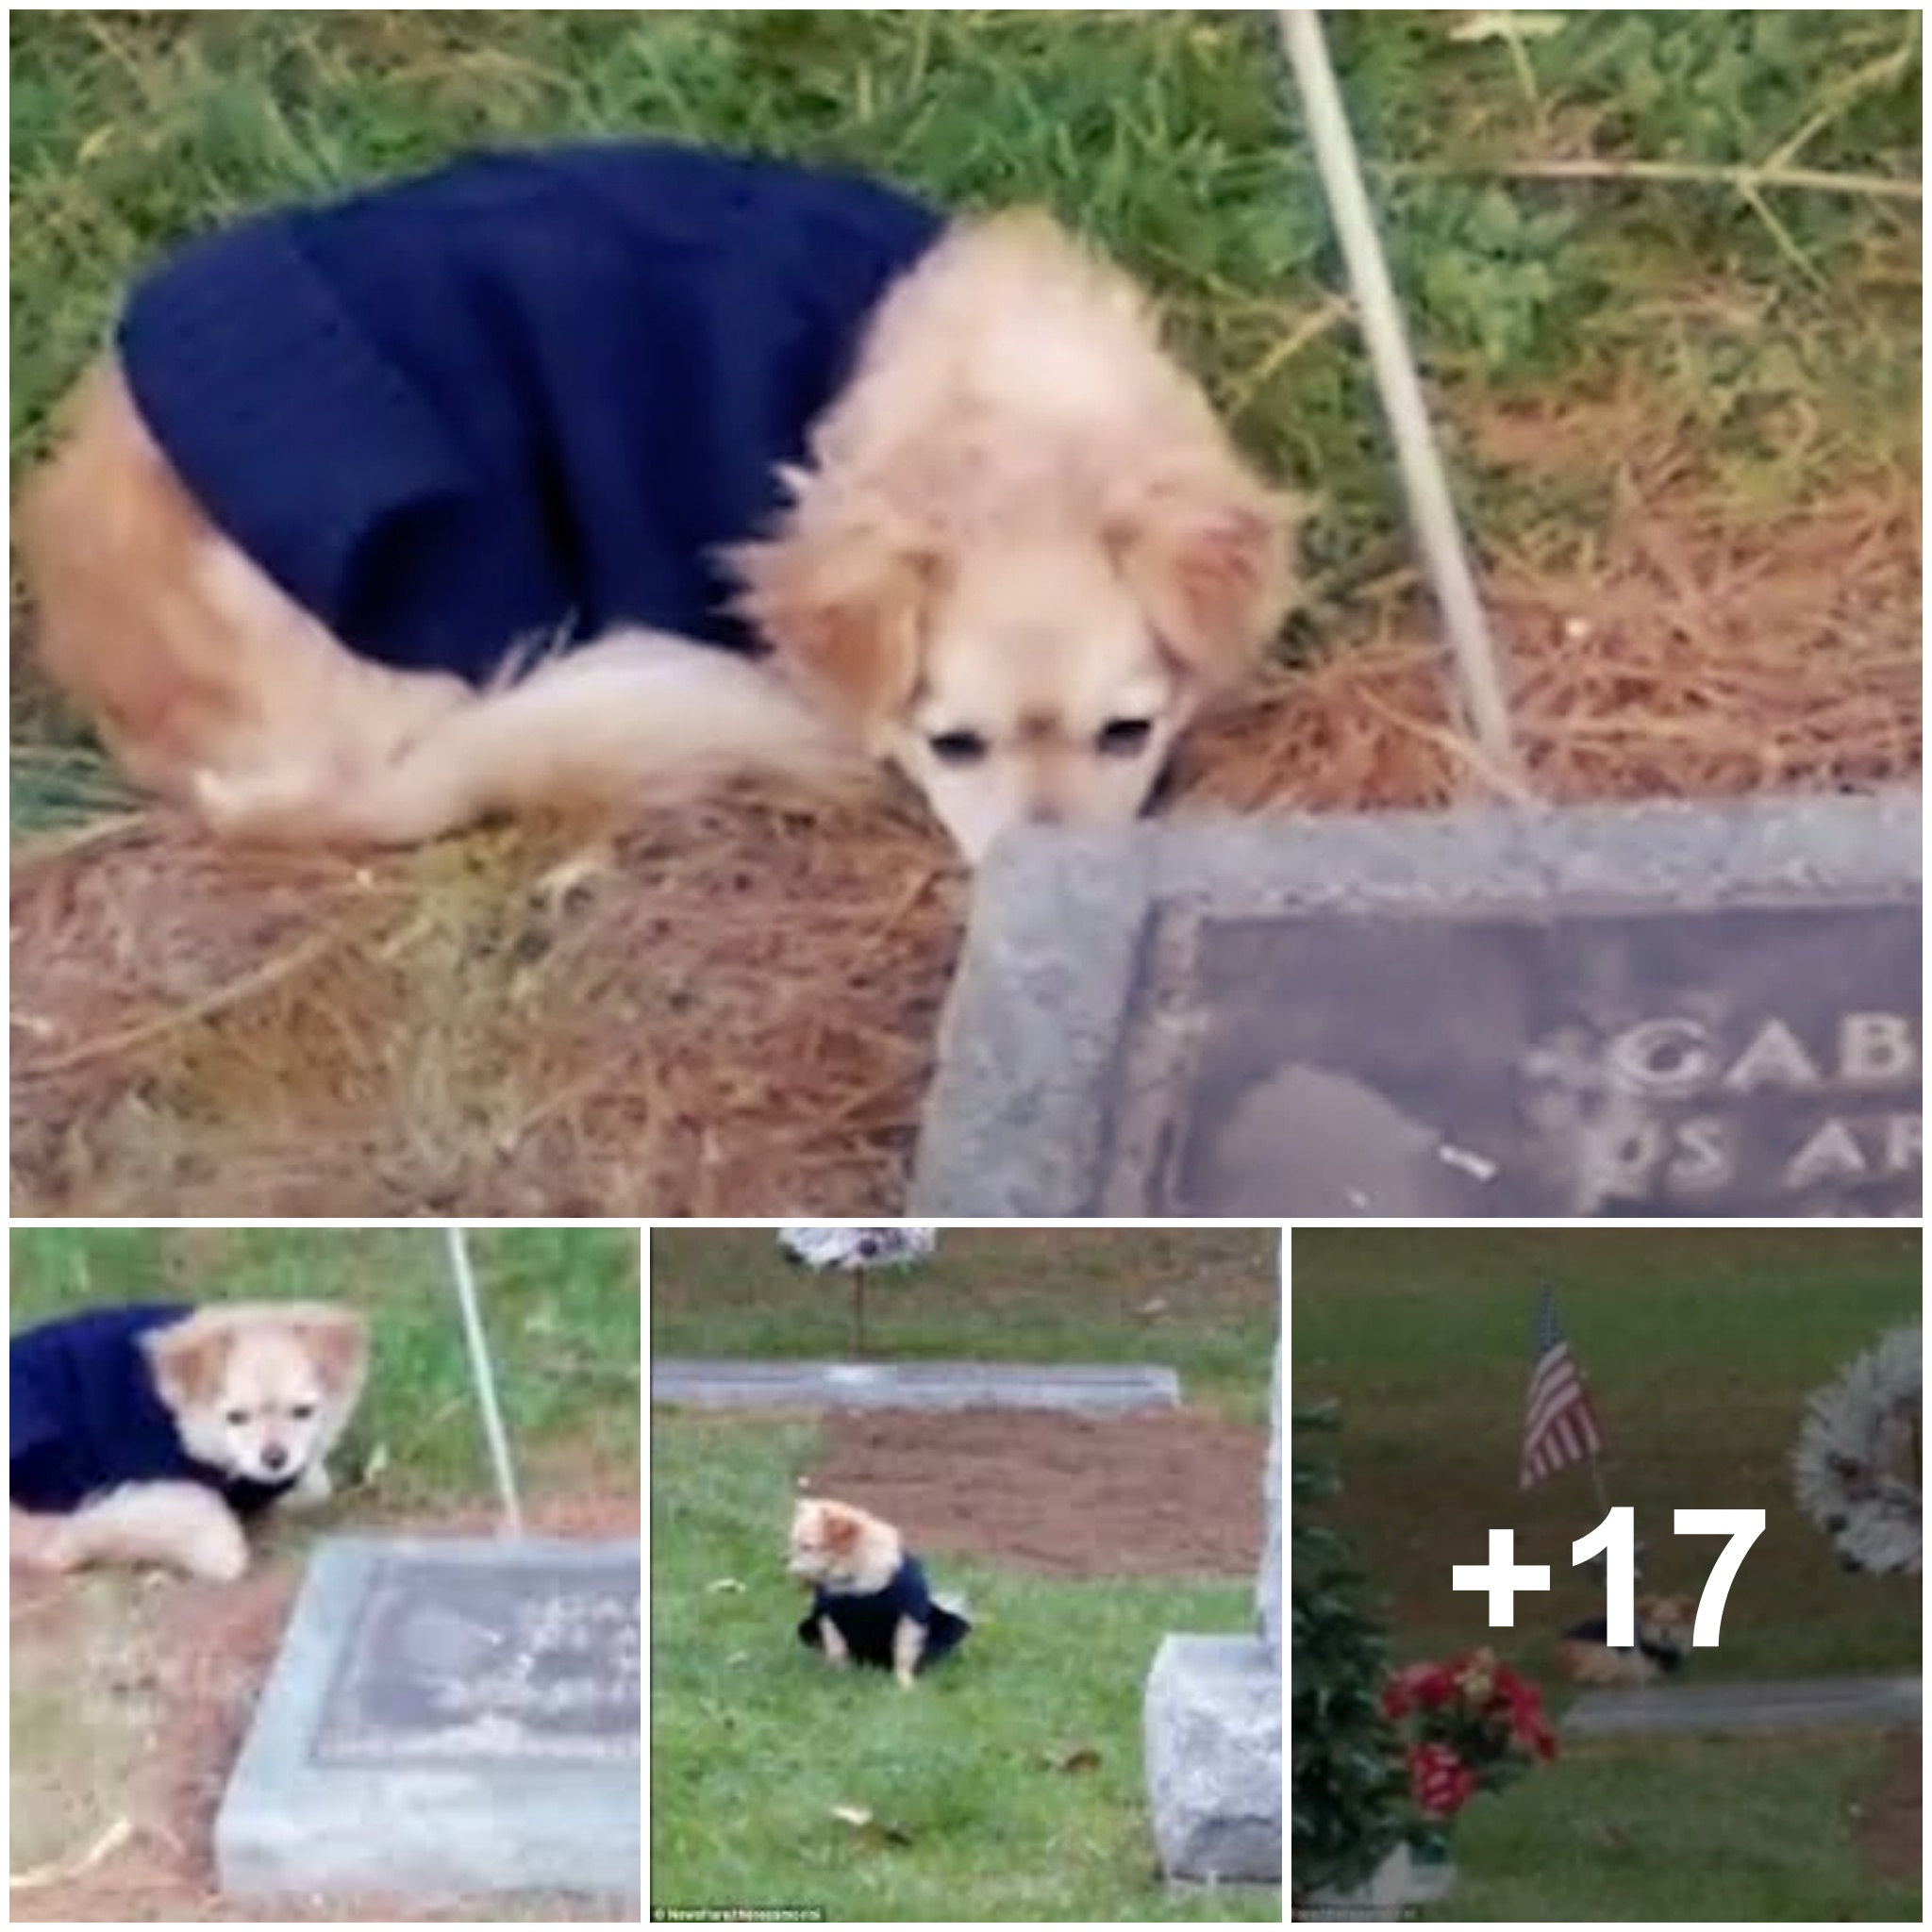 Tragic moment when a loving dog, called away by his new owners, curls up next to the memorial instead of leaving his late owner’s grave